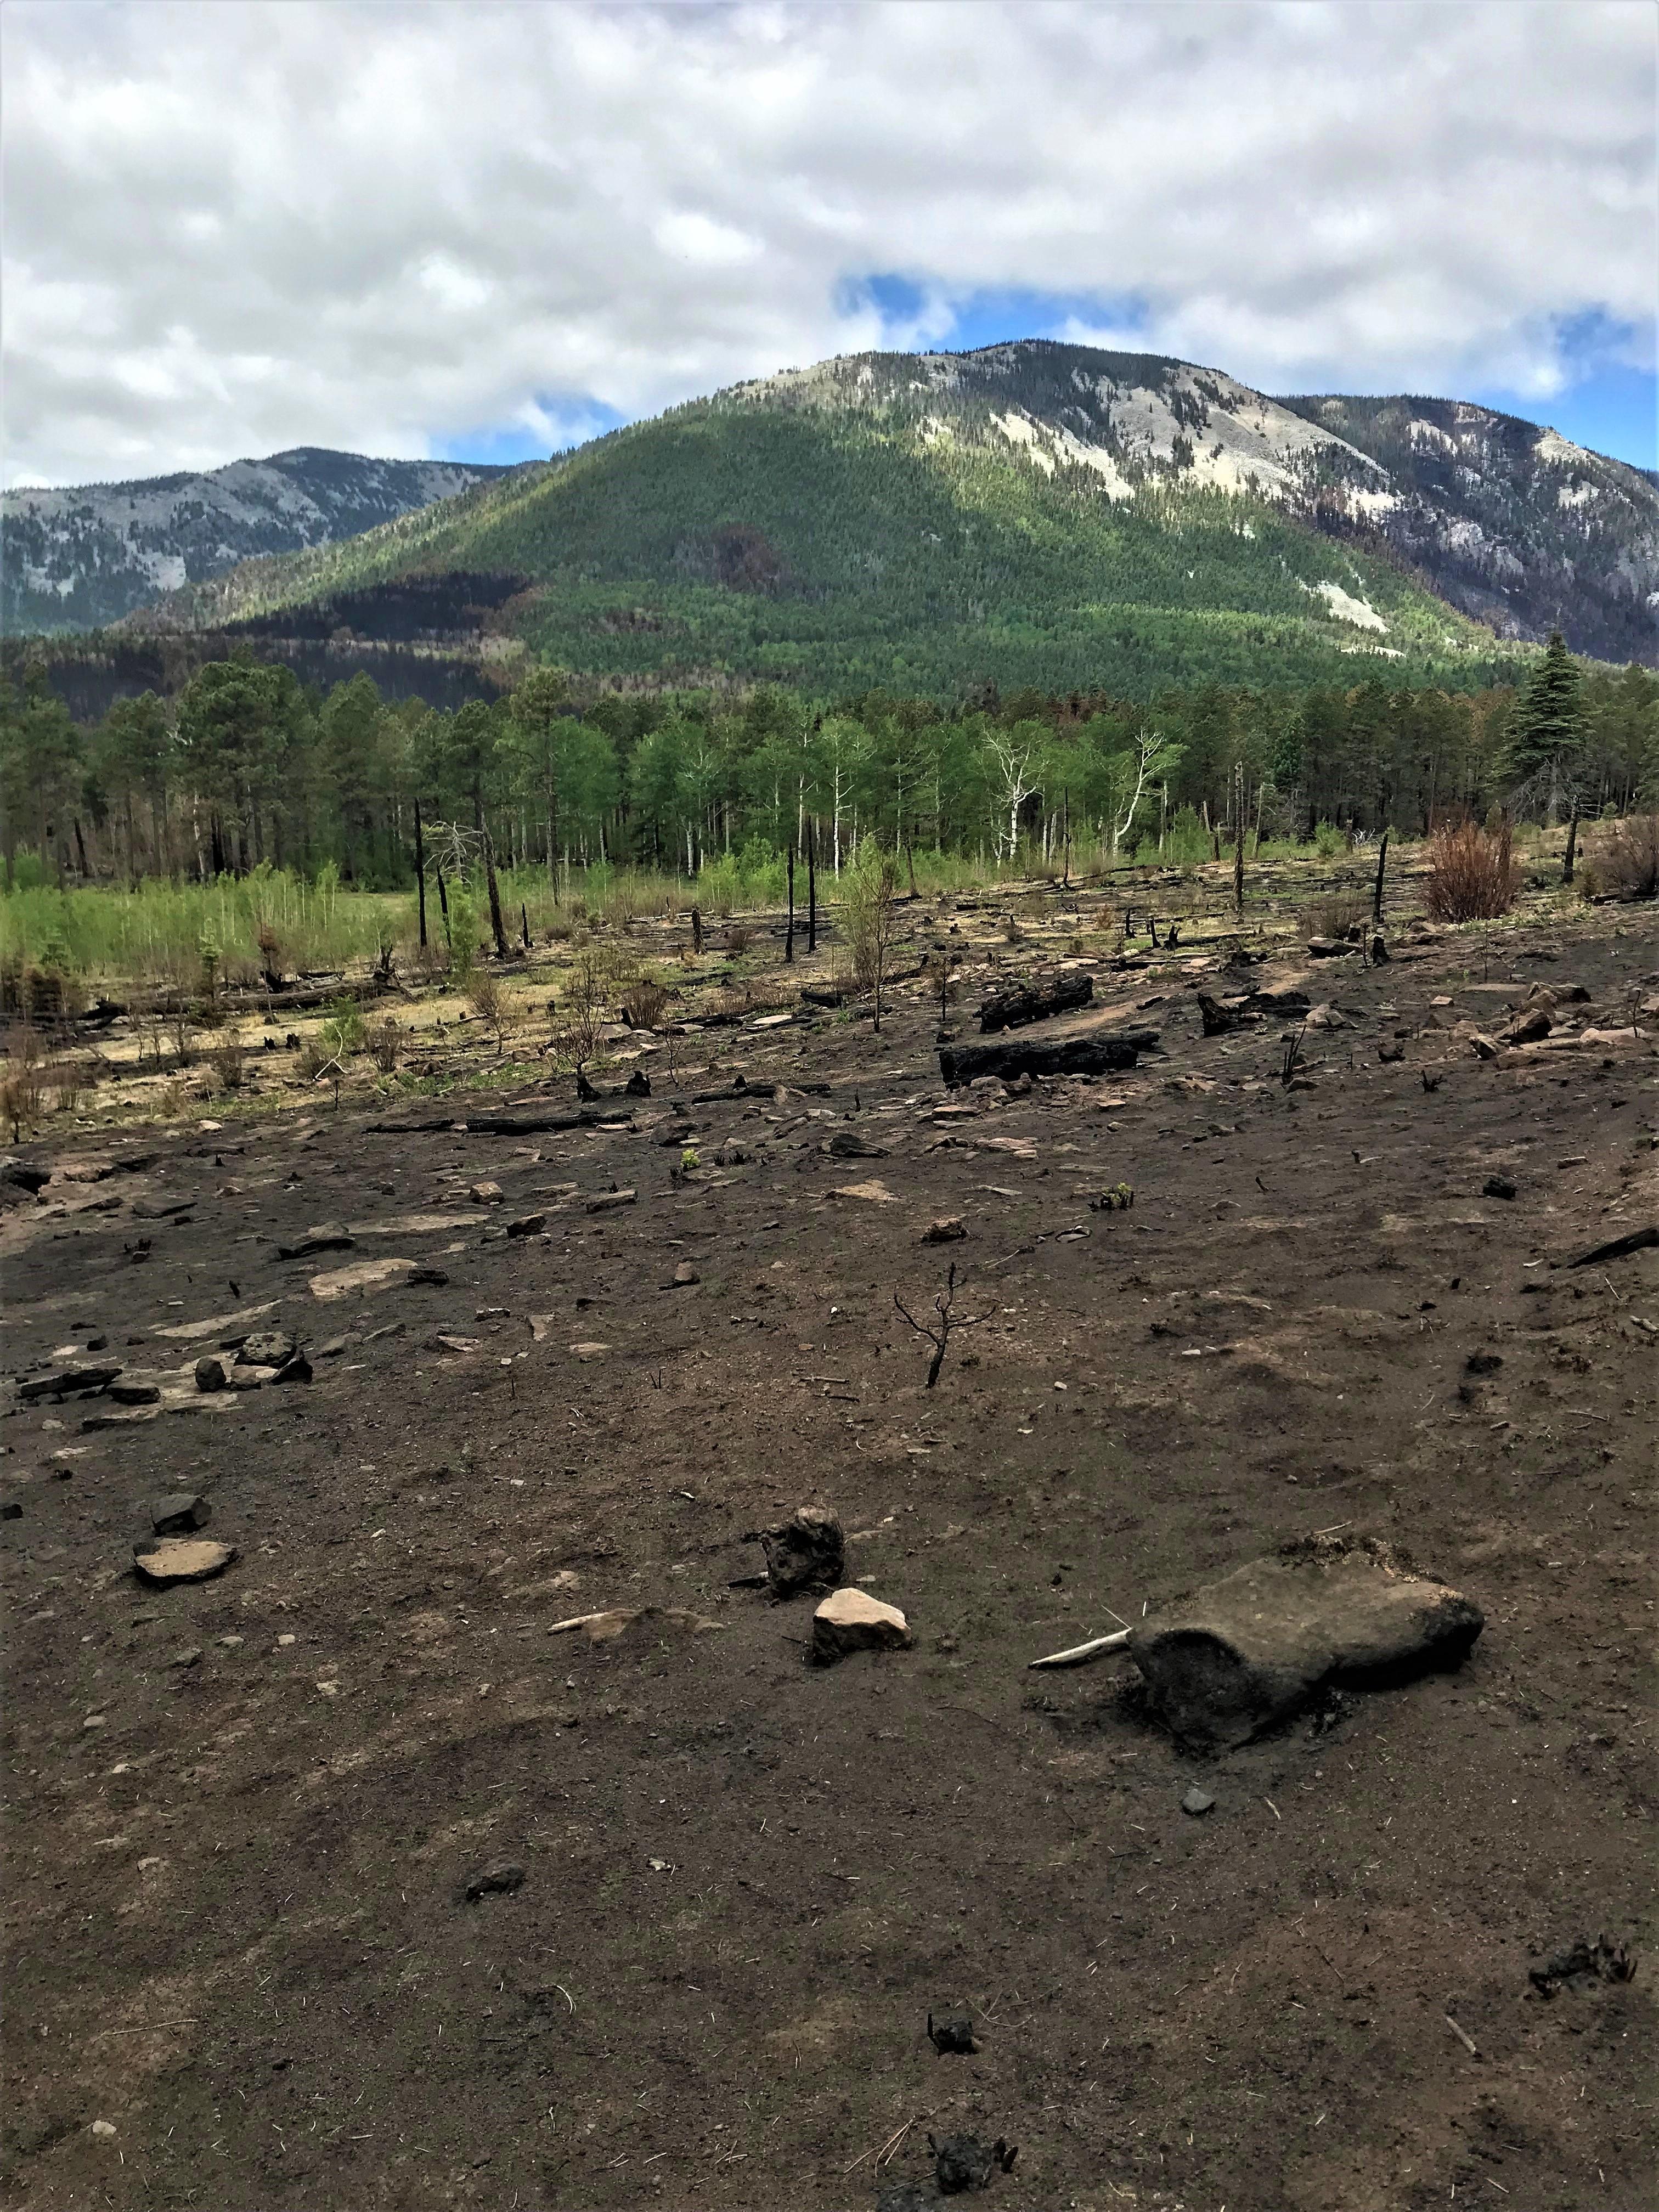 Image showing Overview of a mosaic burn pattern in the Upper Mora River Watershed within the Hermits Peak-Calf Canyon Fire perimeter.